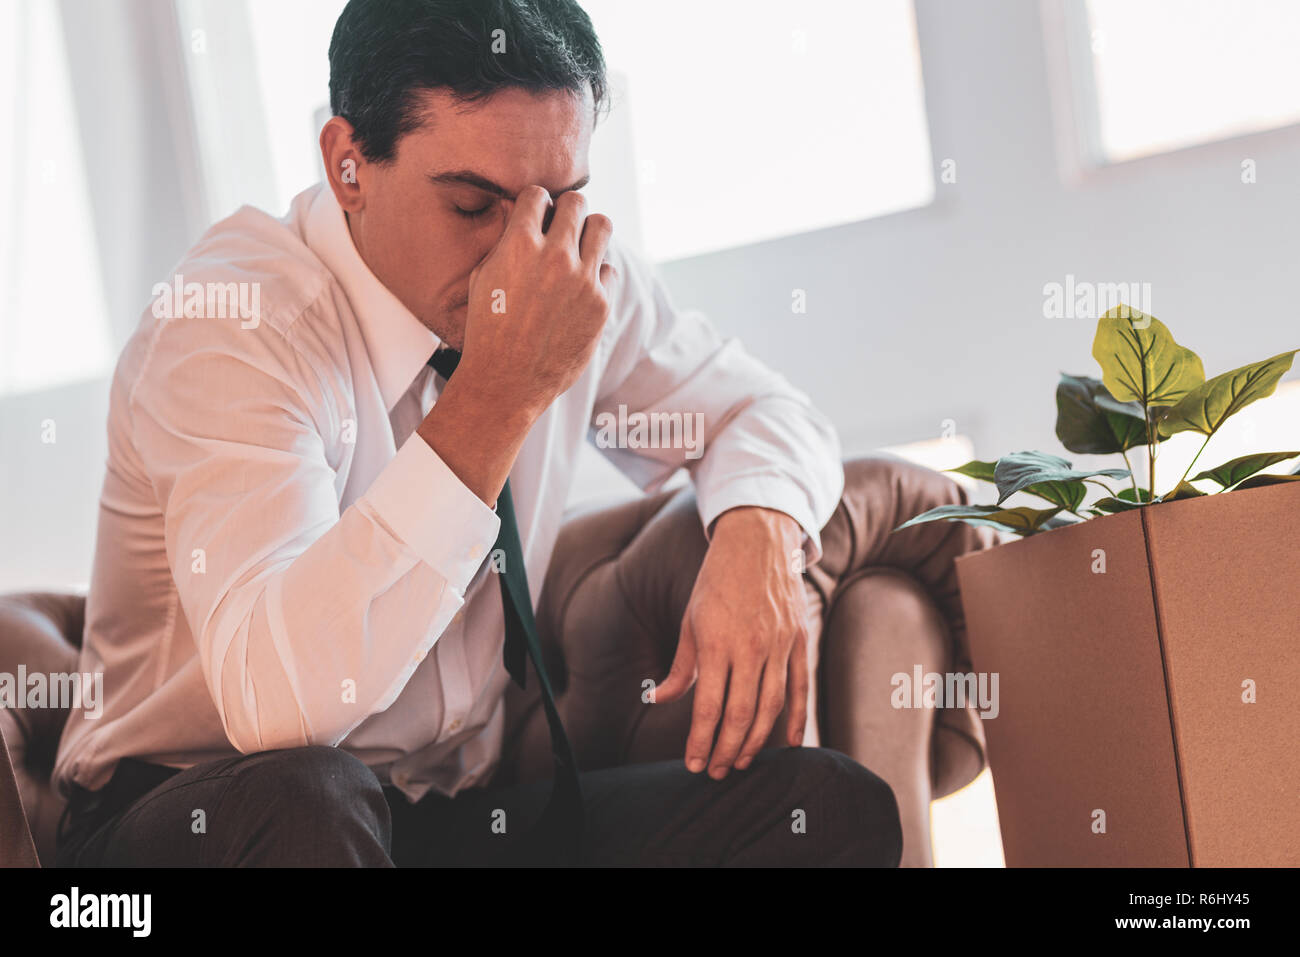 Exhausted dismissed man closing his eyes and thinking Stock Photo